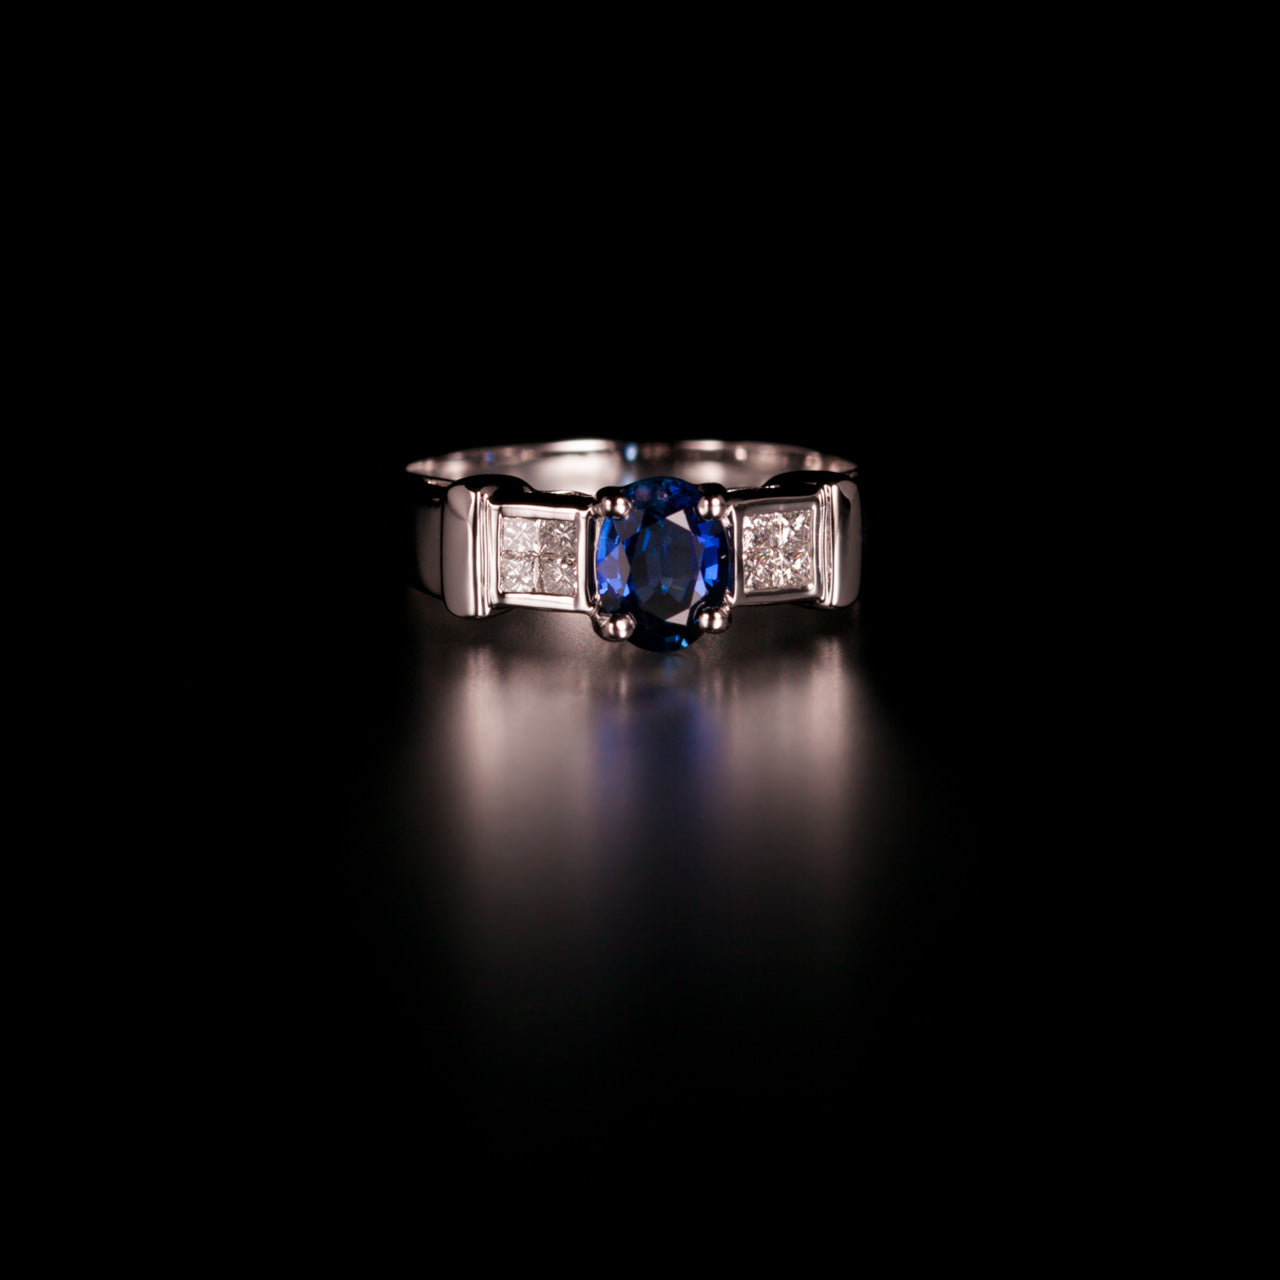 0.90ct blue sapphire ring with diamonds set in 18k white gold